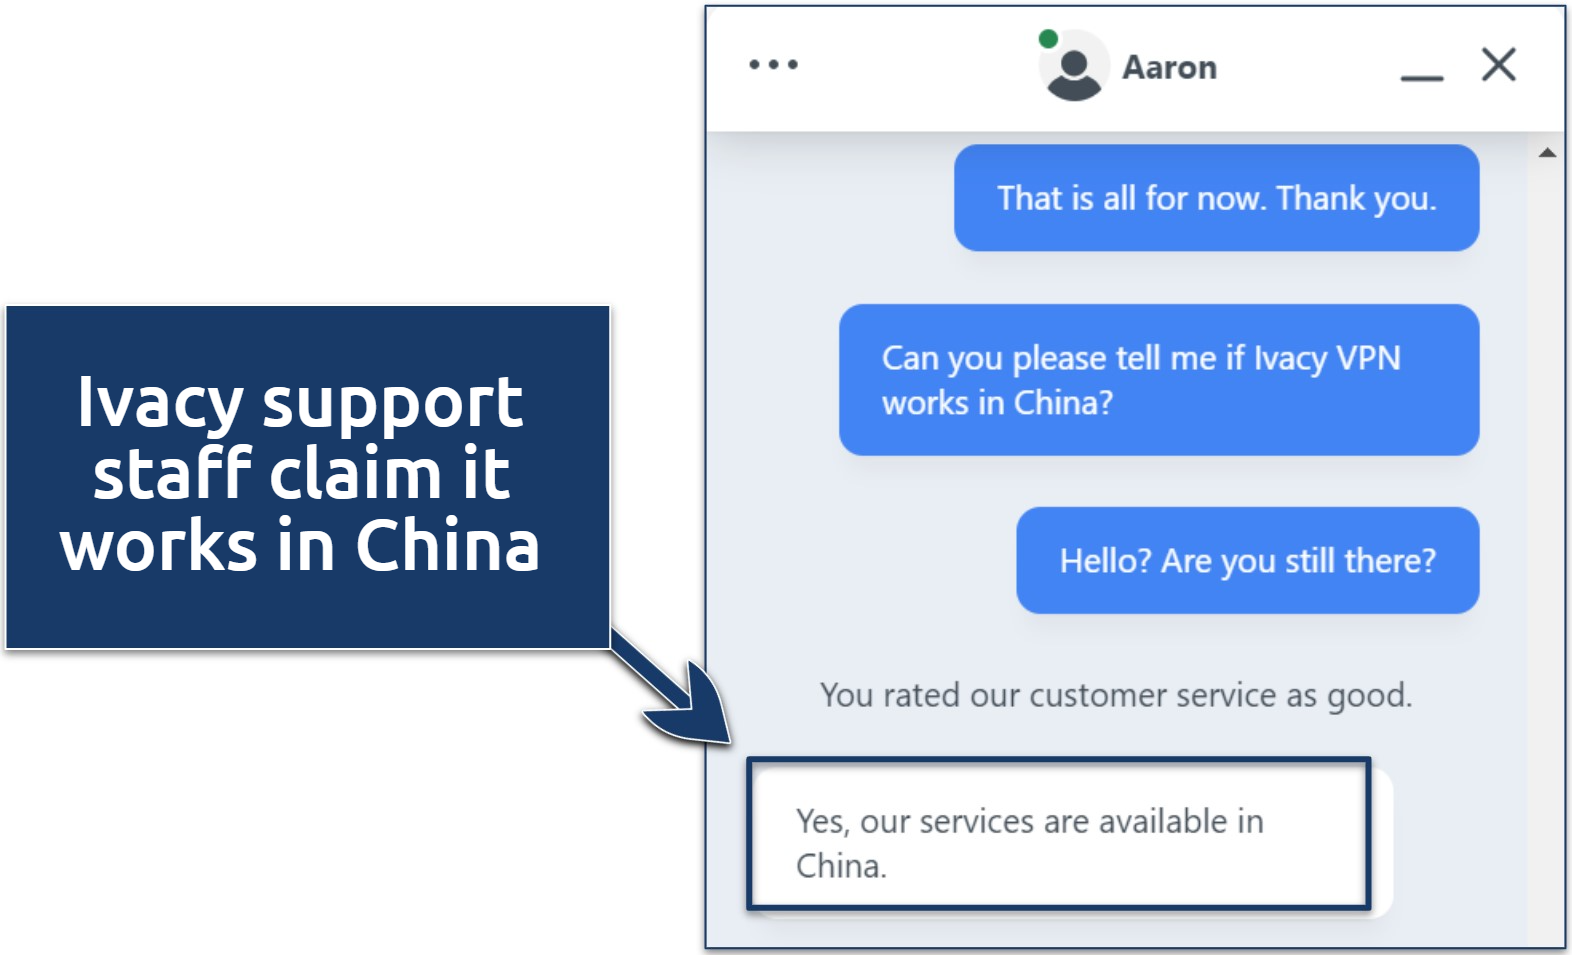 Screenshot of a conversation with Ivacy support via its live chat where they claim it works in China